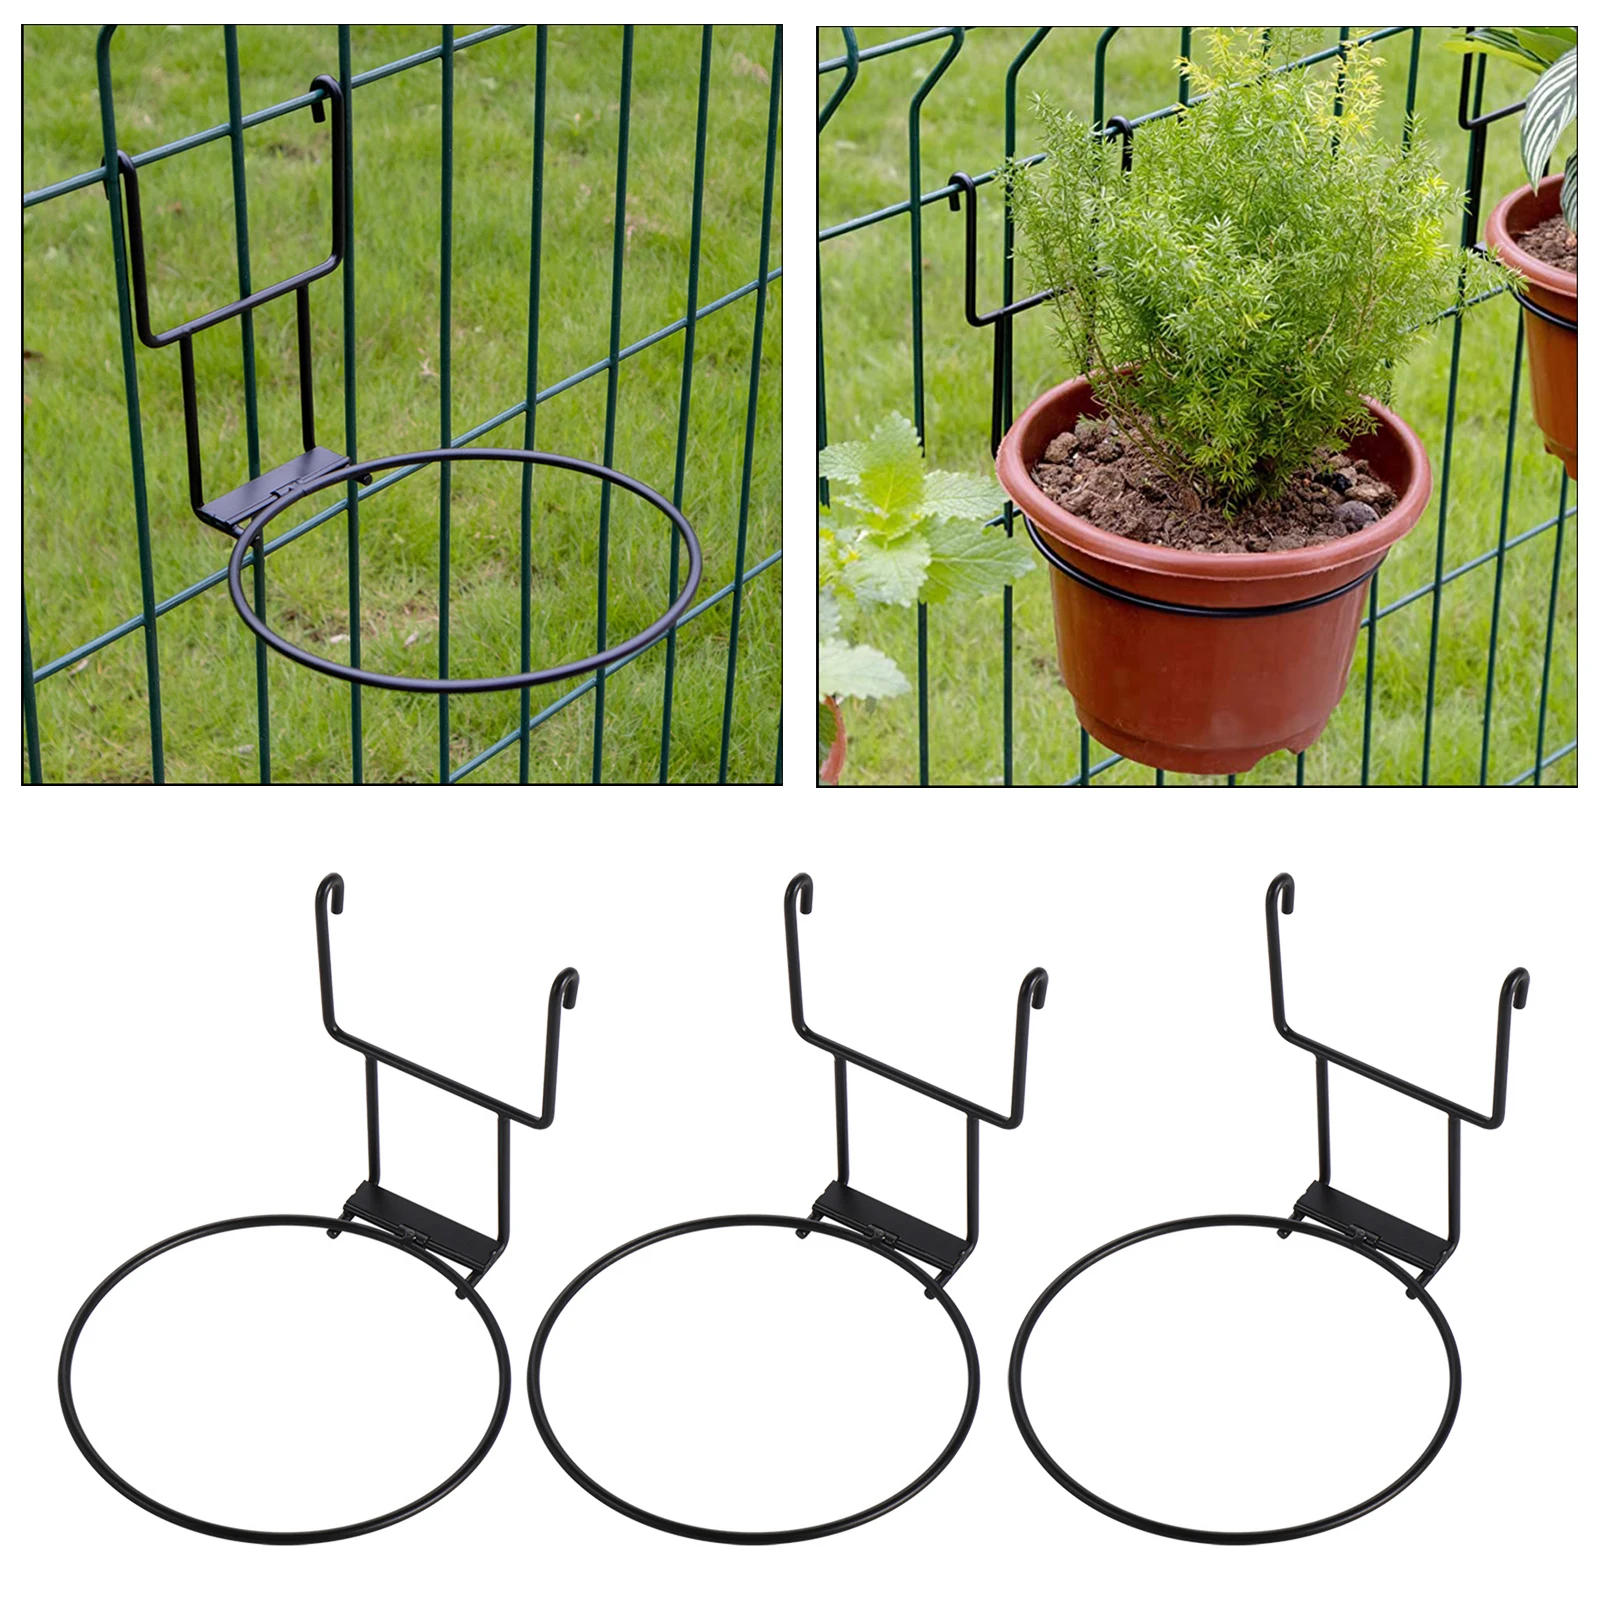 3x Flower Pot Holder Rings Wall Mounted Wrought Iron Wall Flower Plants Tray Metal Pot Rings